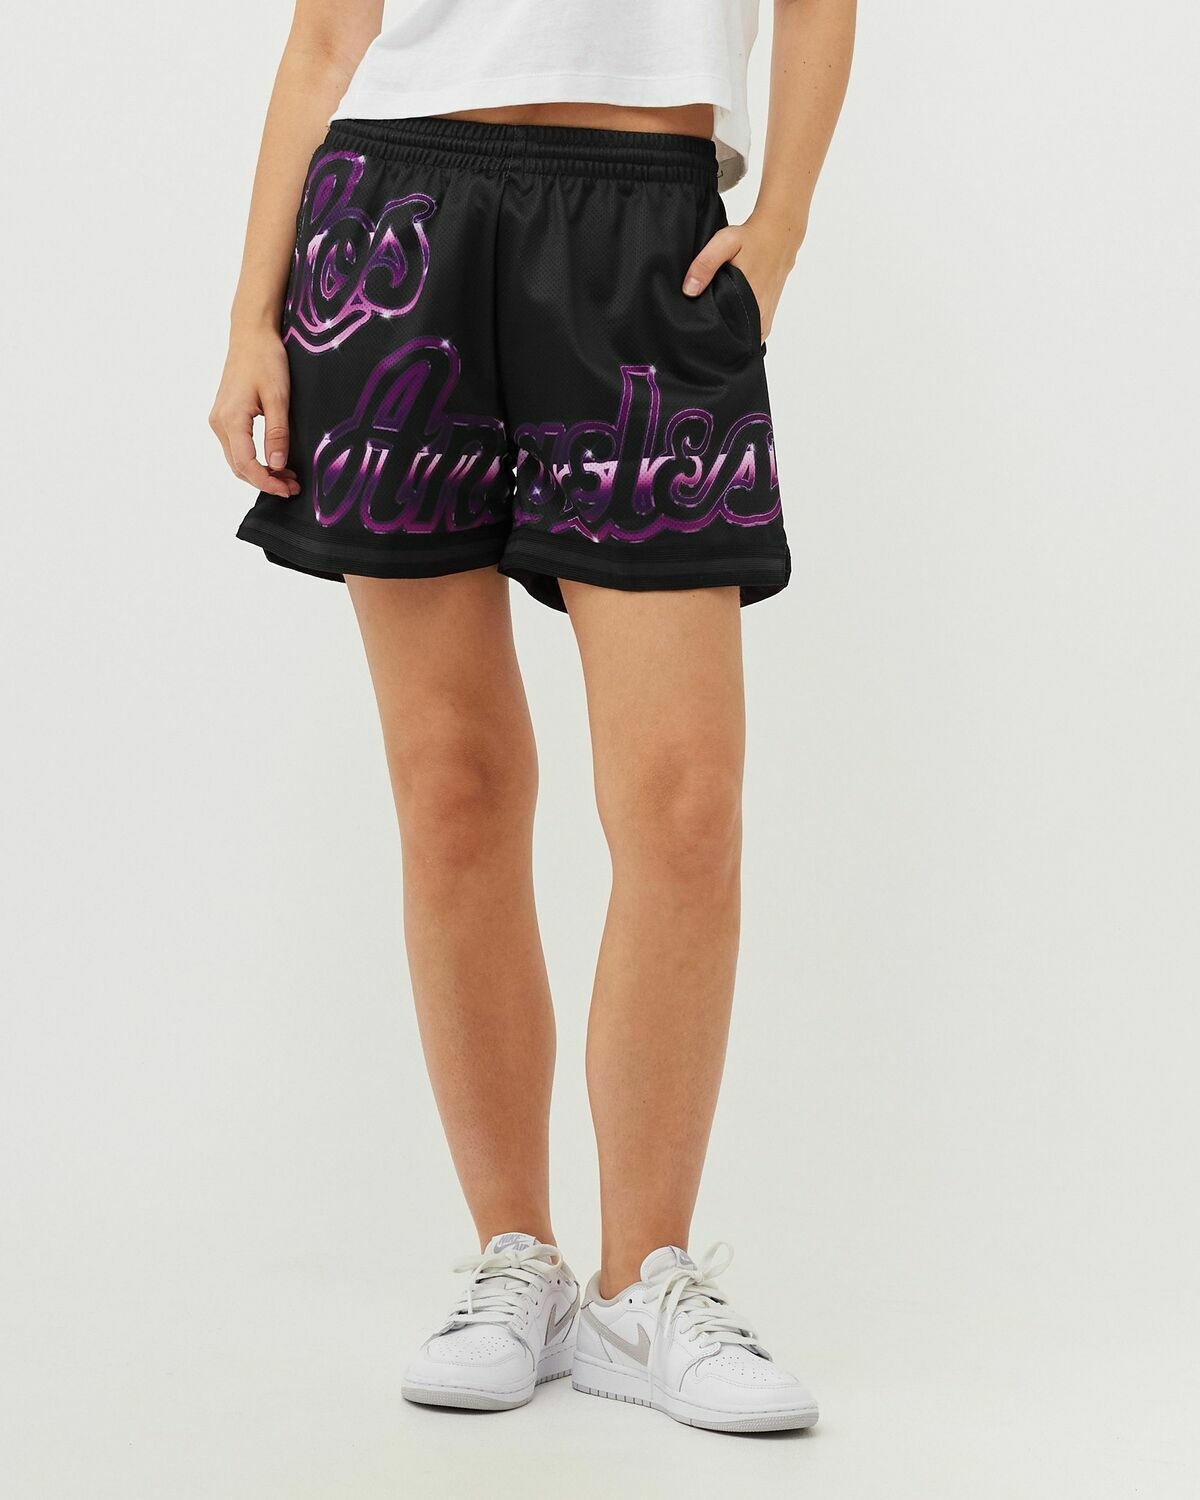 Mitchell & Ness Wmns Big Face 4.0 Shorts Los Angeles Lakers Black - Womens - Sport & Team Shorts